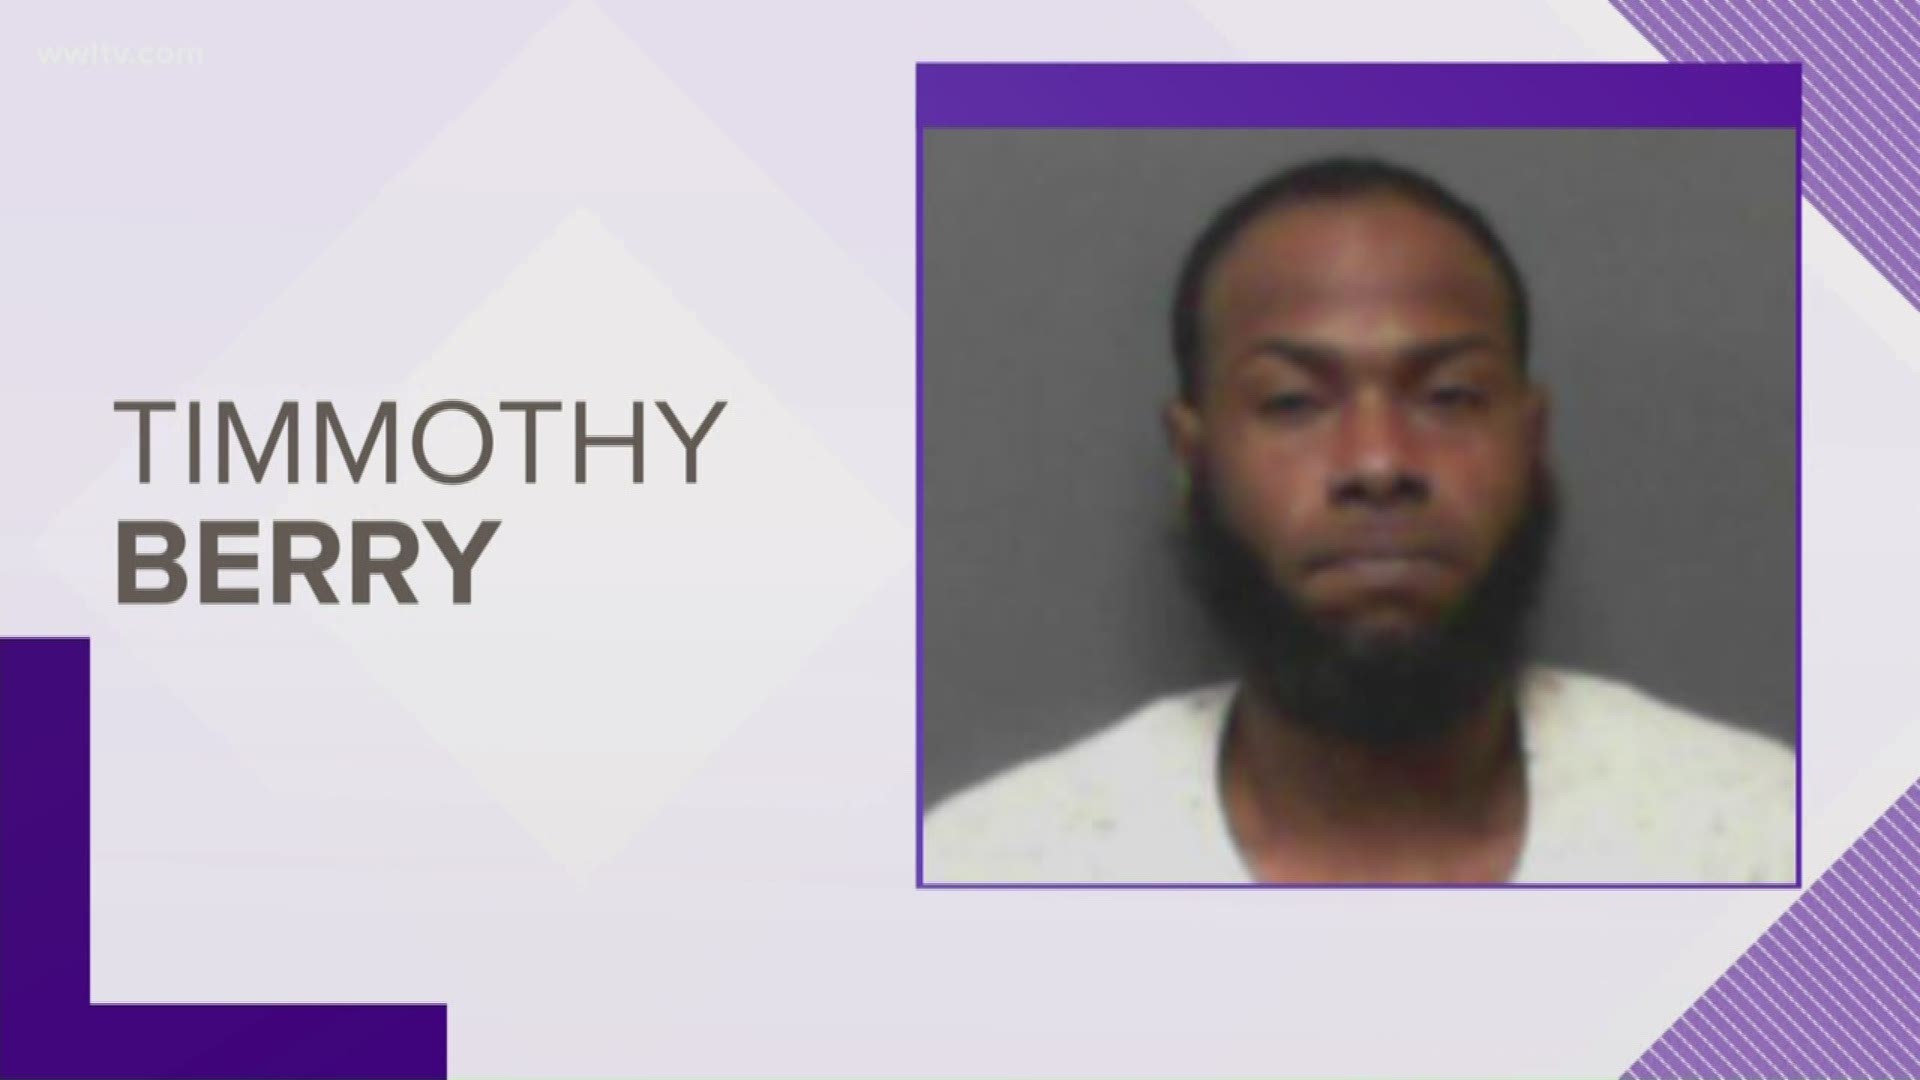 During the investigation, HPD detectives said Timmothy Berry, 37-years-old of Hammond, fatally shot Michael Cuccia.